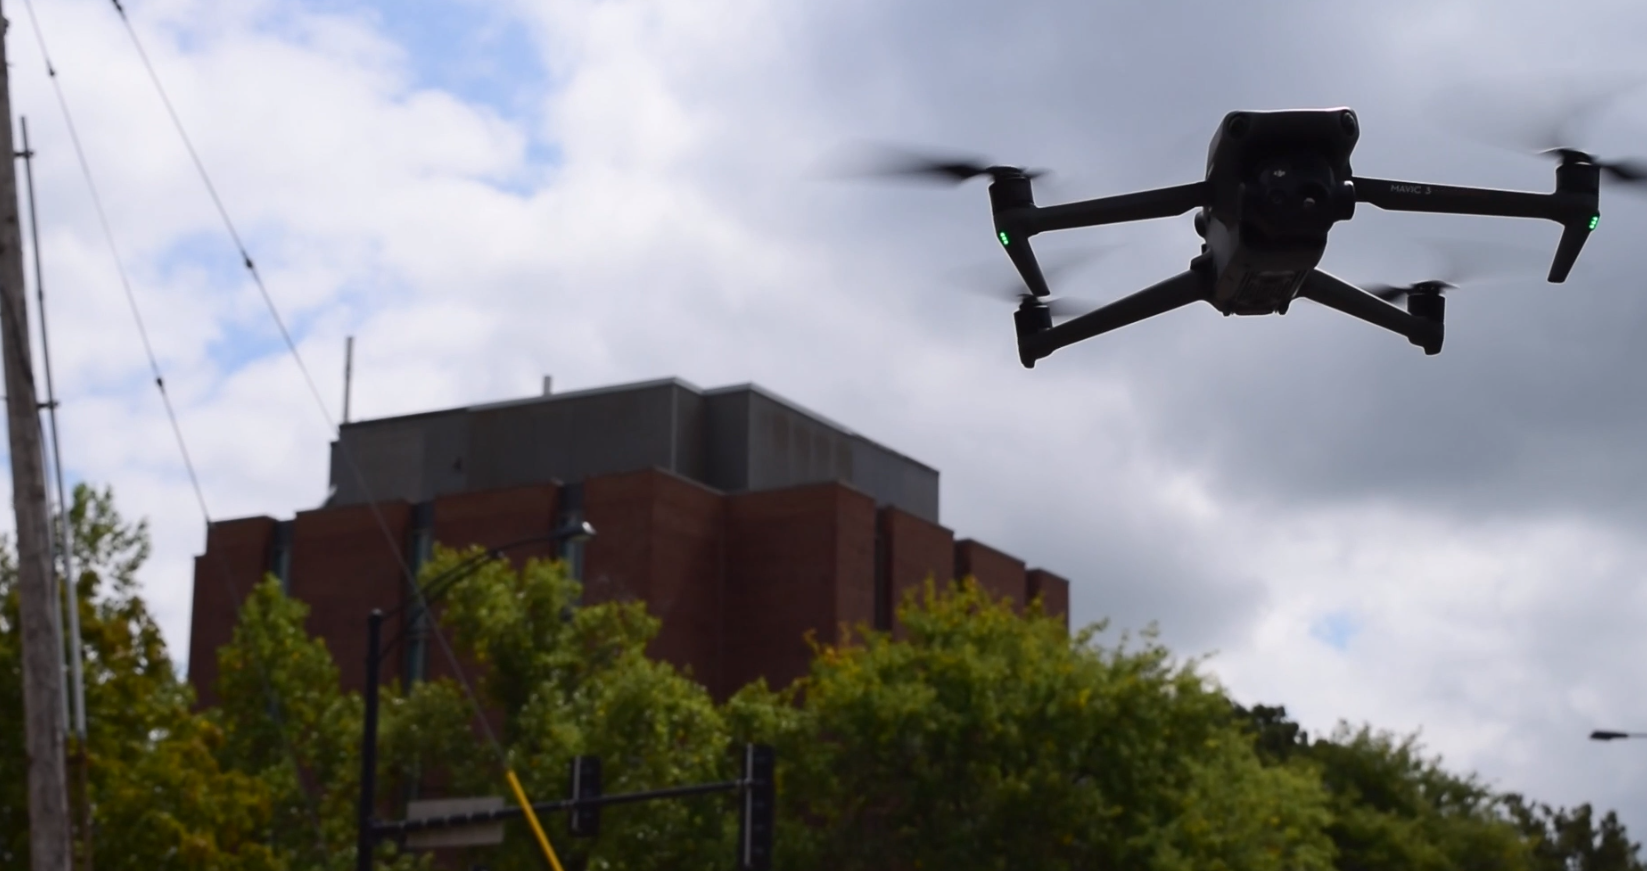 Airborne drone against a cloudy background. A campus building and trees are also visible.